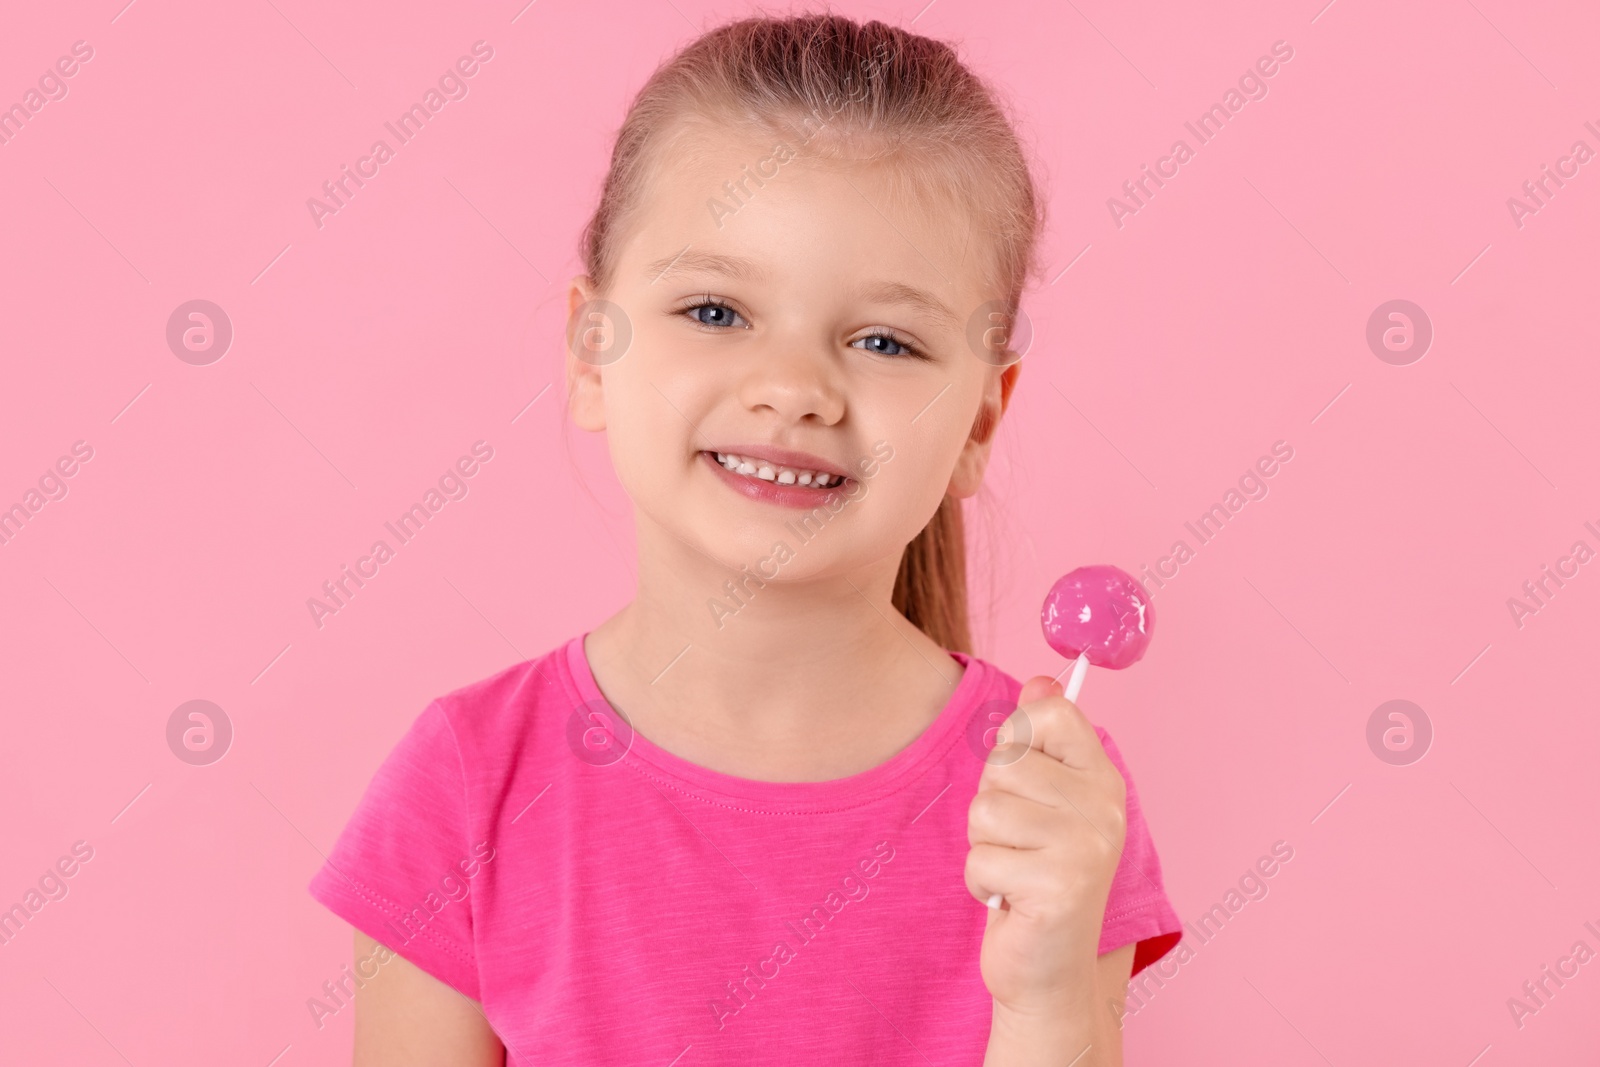 Photo of Happy little girl with lollipop on pink background